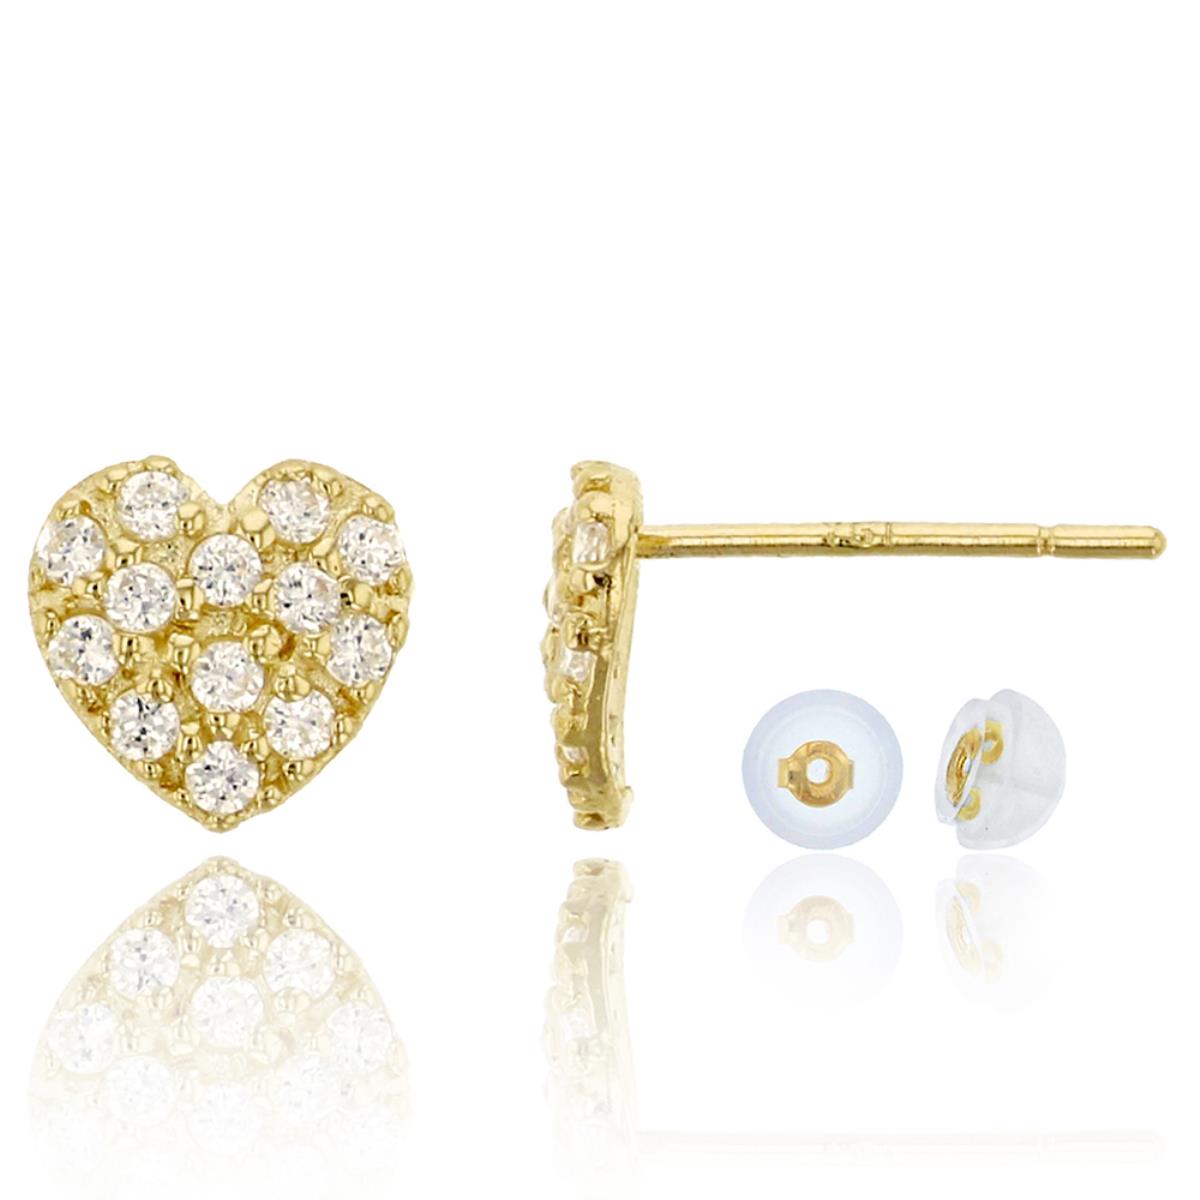 10K Yellow Gold Pave Heart Stud Earring & 10K Silicone Back